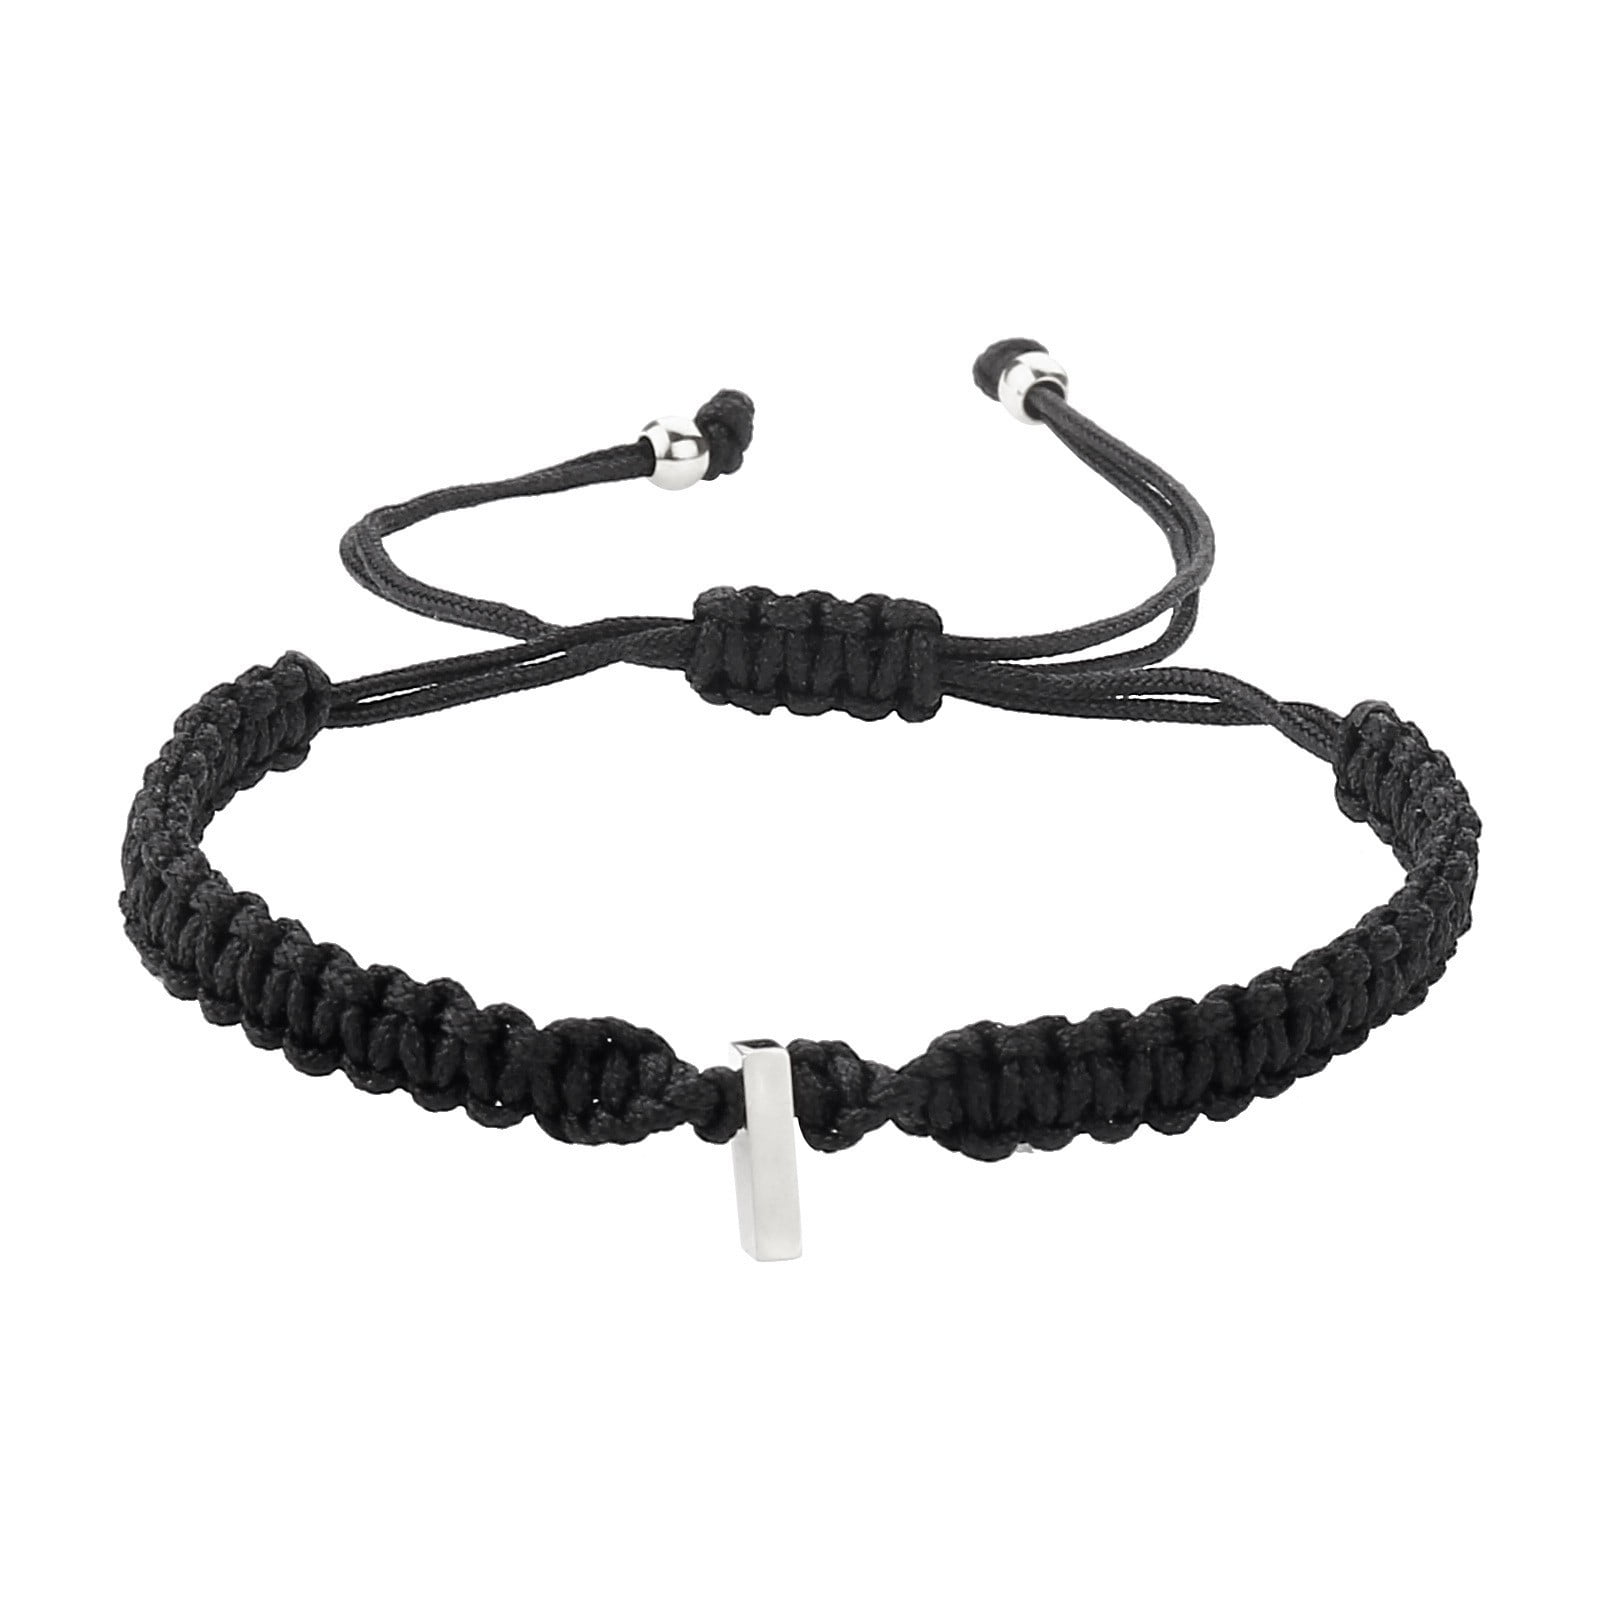 Sincere Partners in Crime Bracelets Handcuff Friendship BFF India | Ubuy